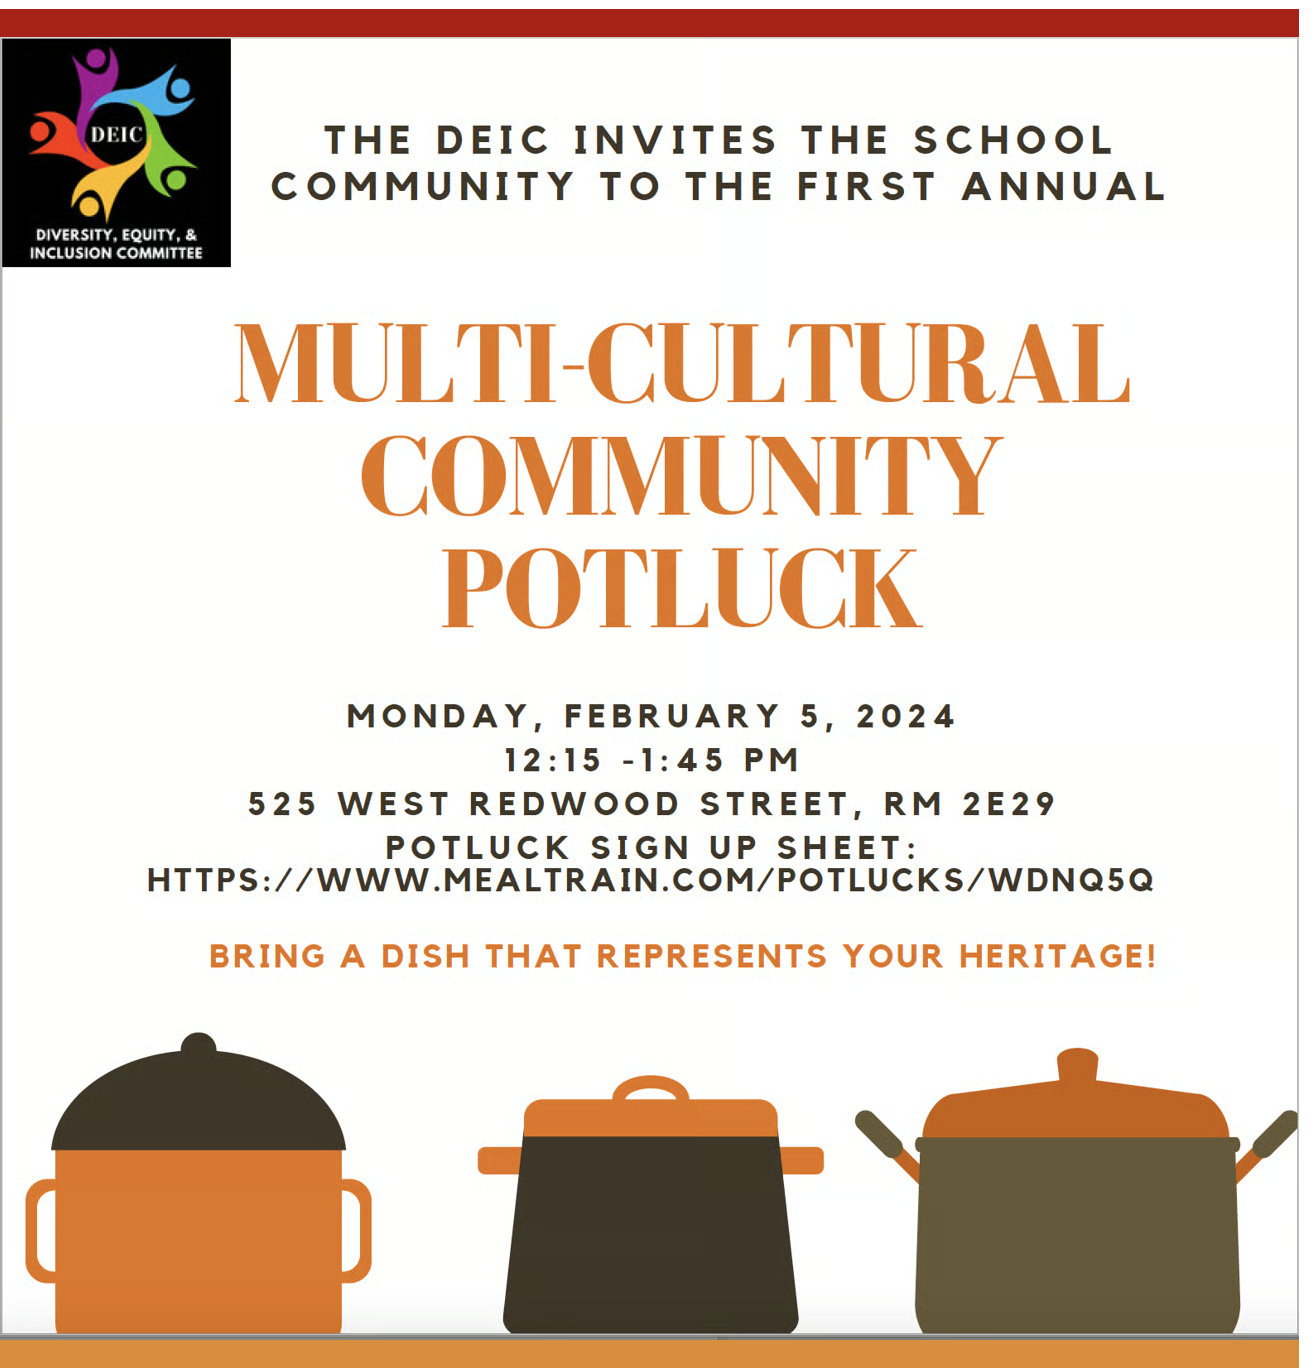 SSW Multicultural Community Potluck on Feb. 5 from 12:15-1:45 in the SSW, Room 2E29